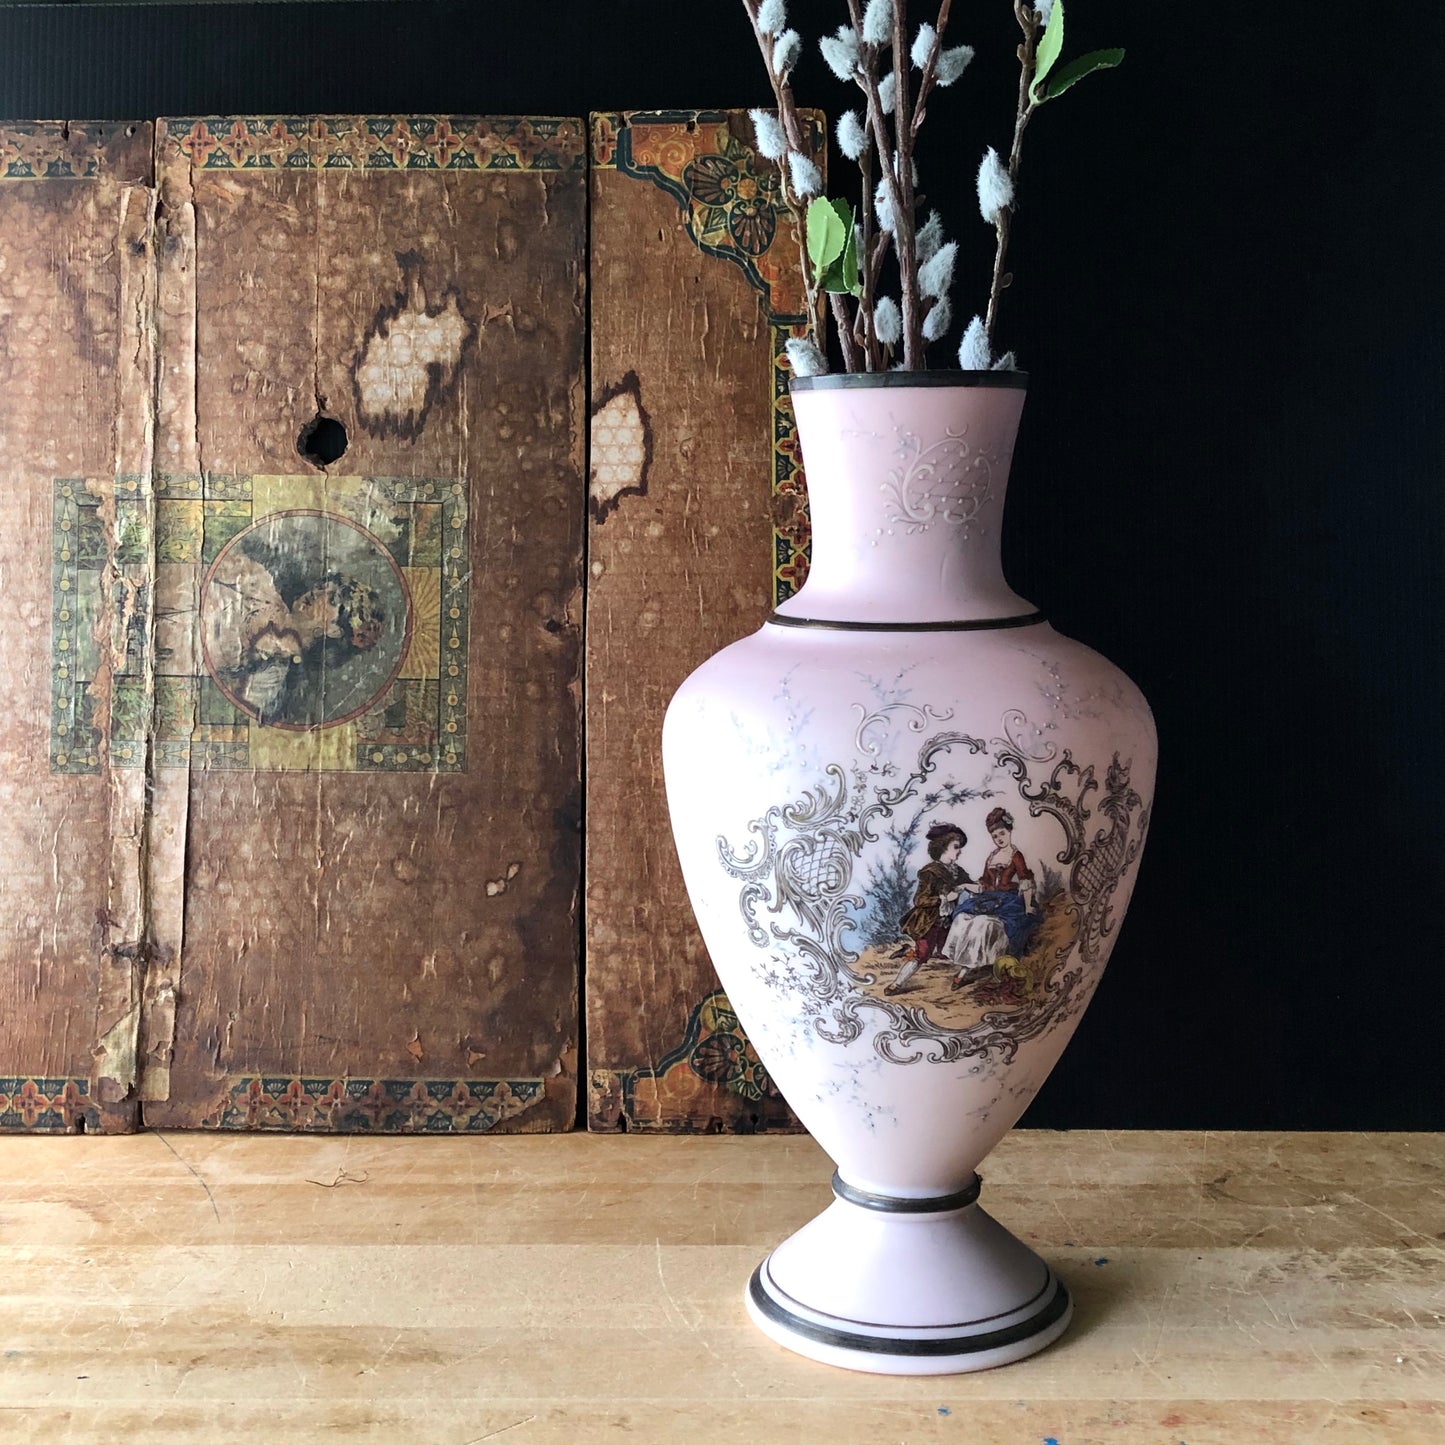 Pink Victorian Courting Couples Vase (c.1900s)